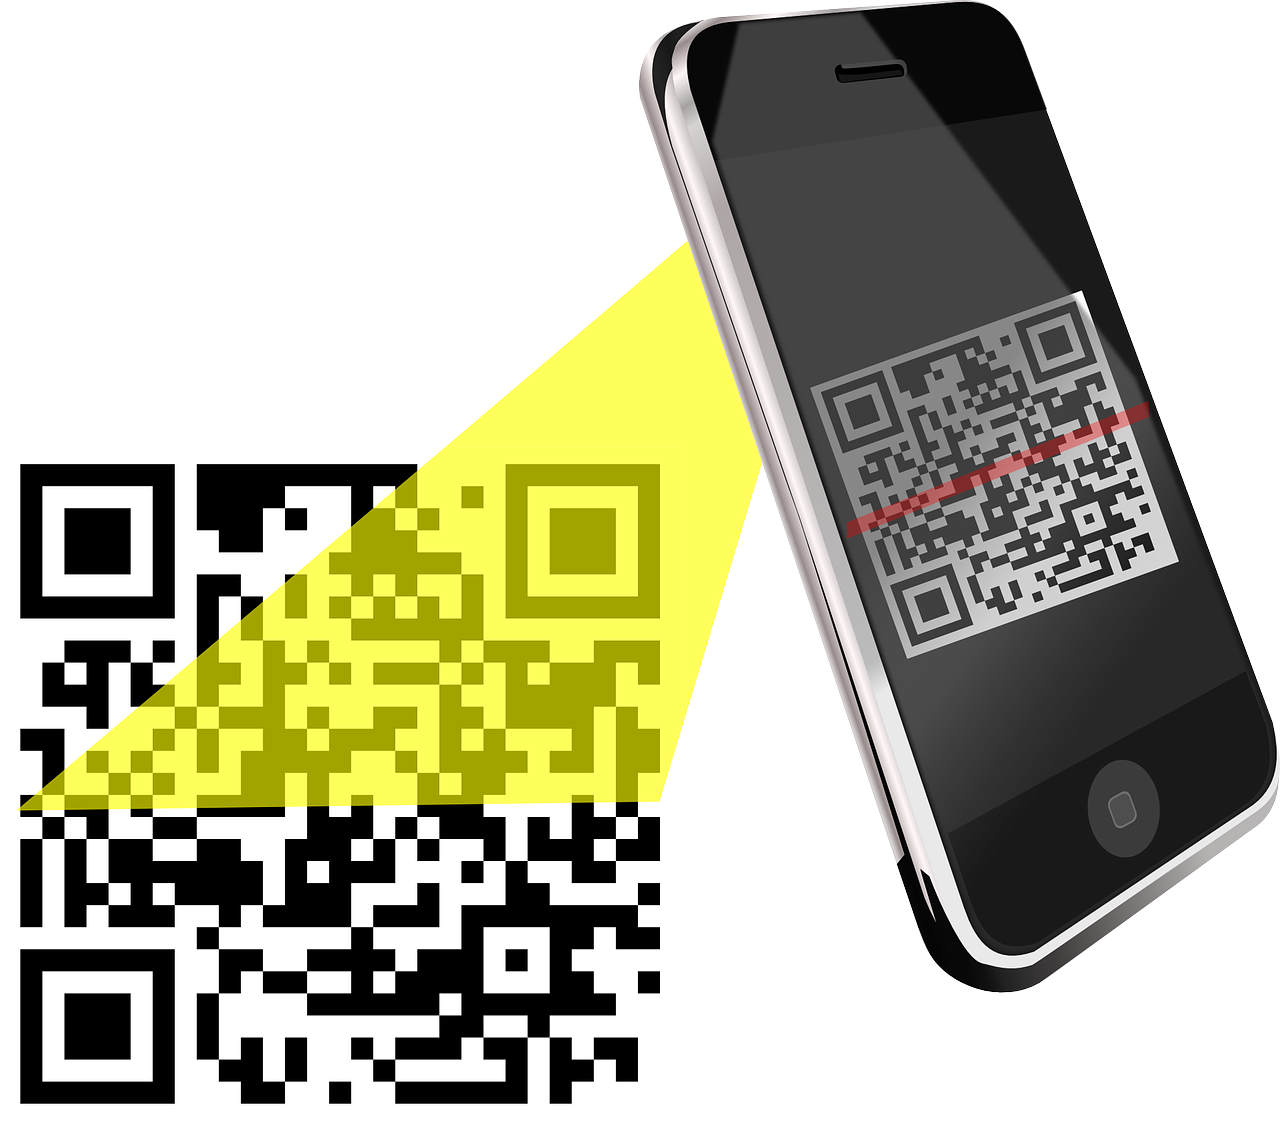 How to convert an image into QR code?